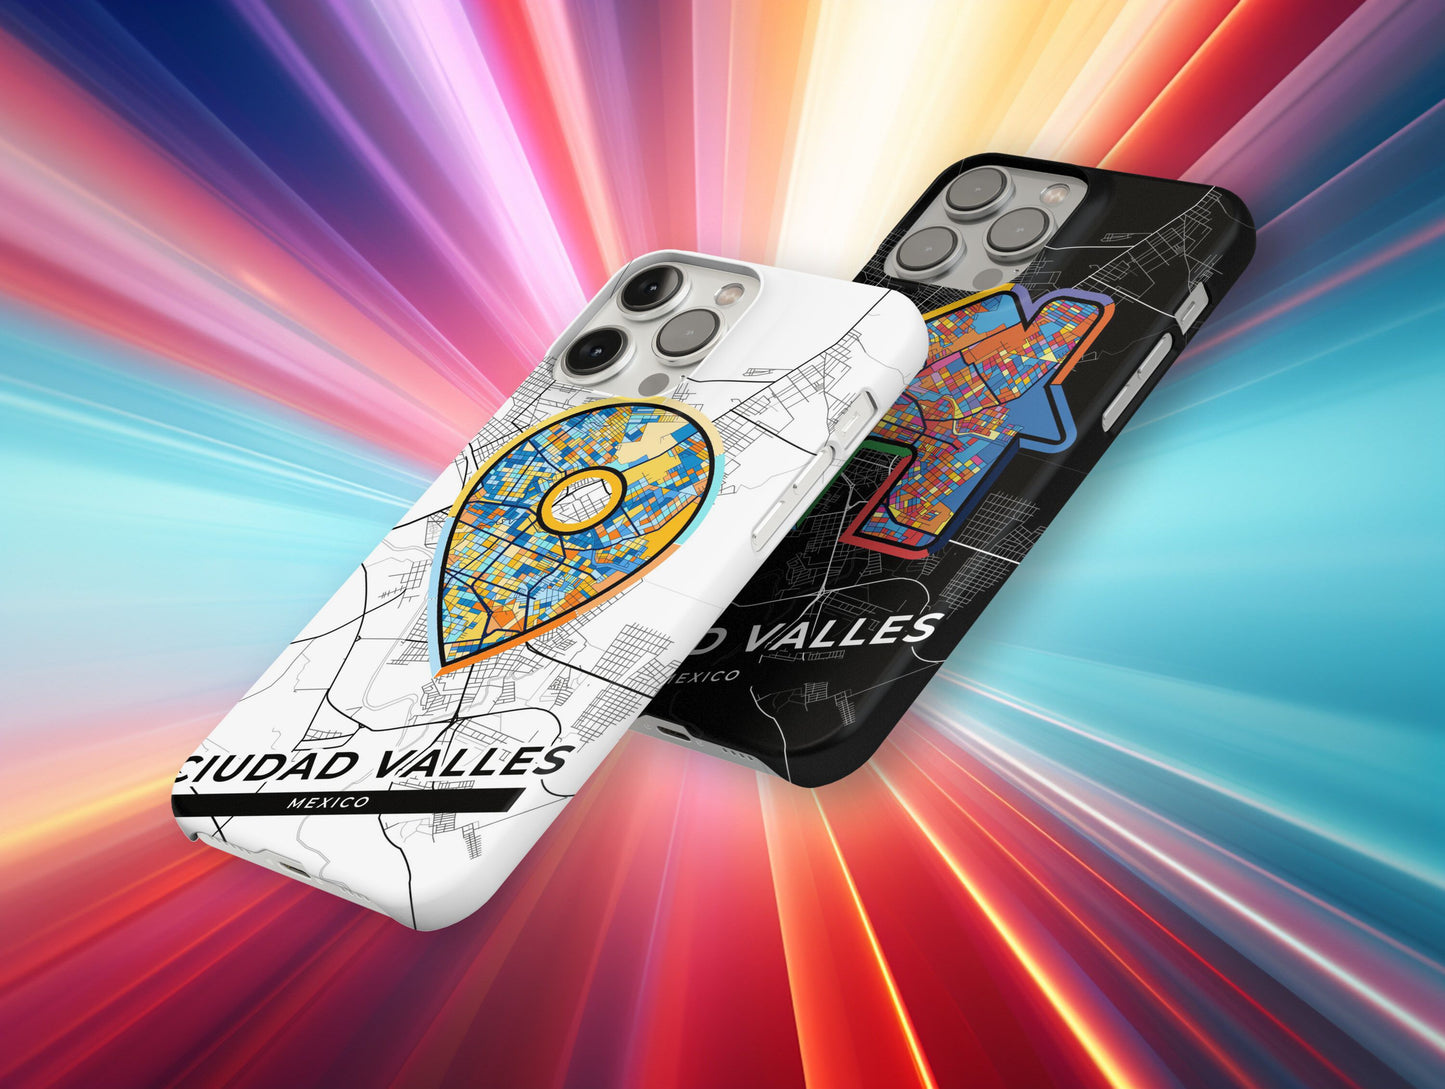 Ciudad Valles Mexico slim phone case with colorful icon. Birthday, wedding or housewarming gift. Couple match cases.